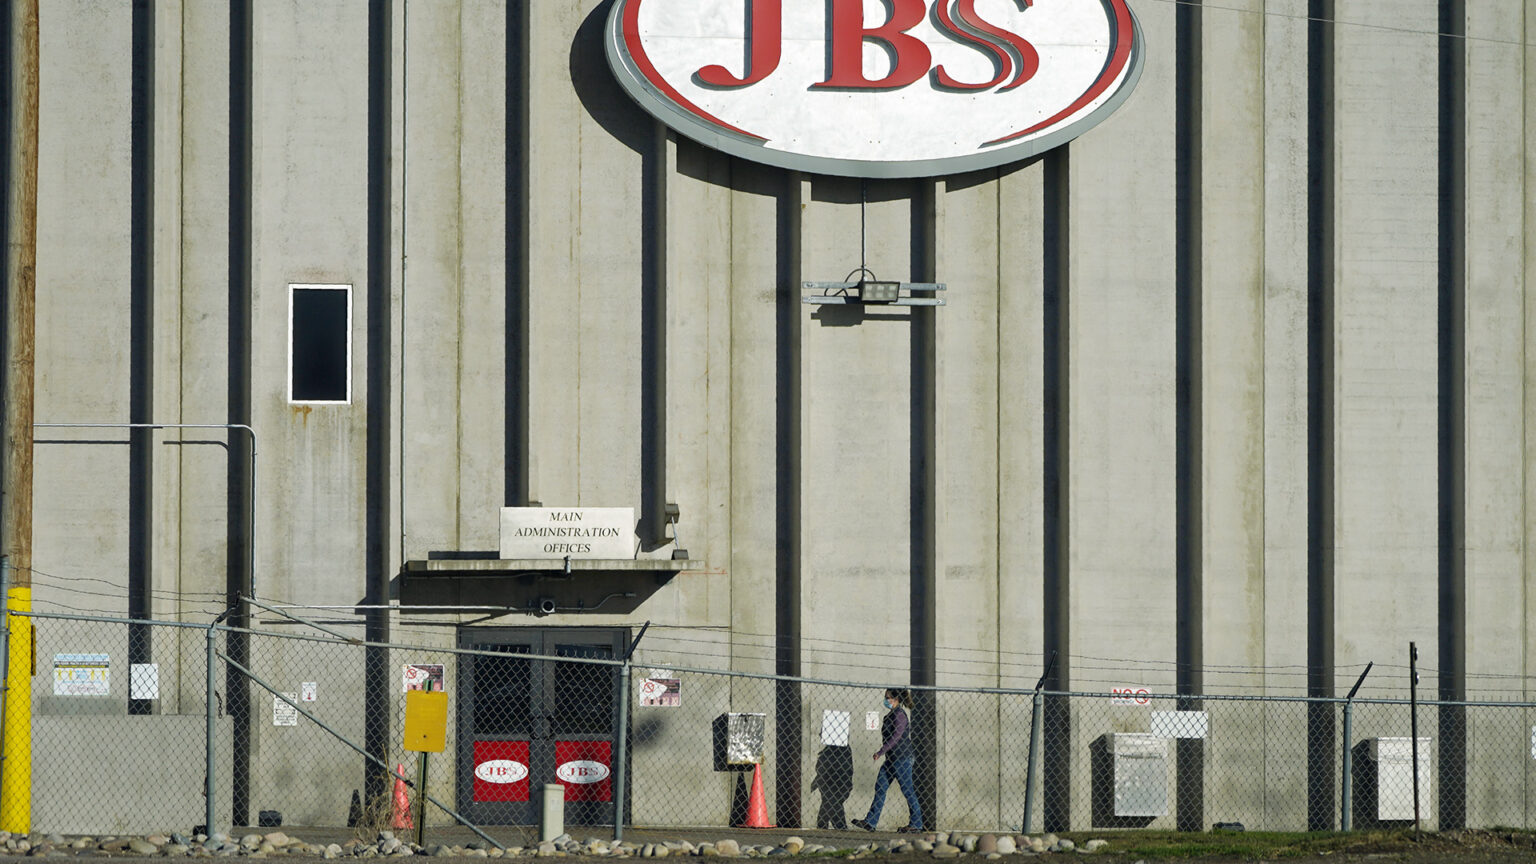 A person walks under a sign with a wordmark logo that reads JBS toward an entrance of a multi-story building with concrete and metal walls, with a chain-link fence topped by barbed wire in the foreground.